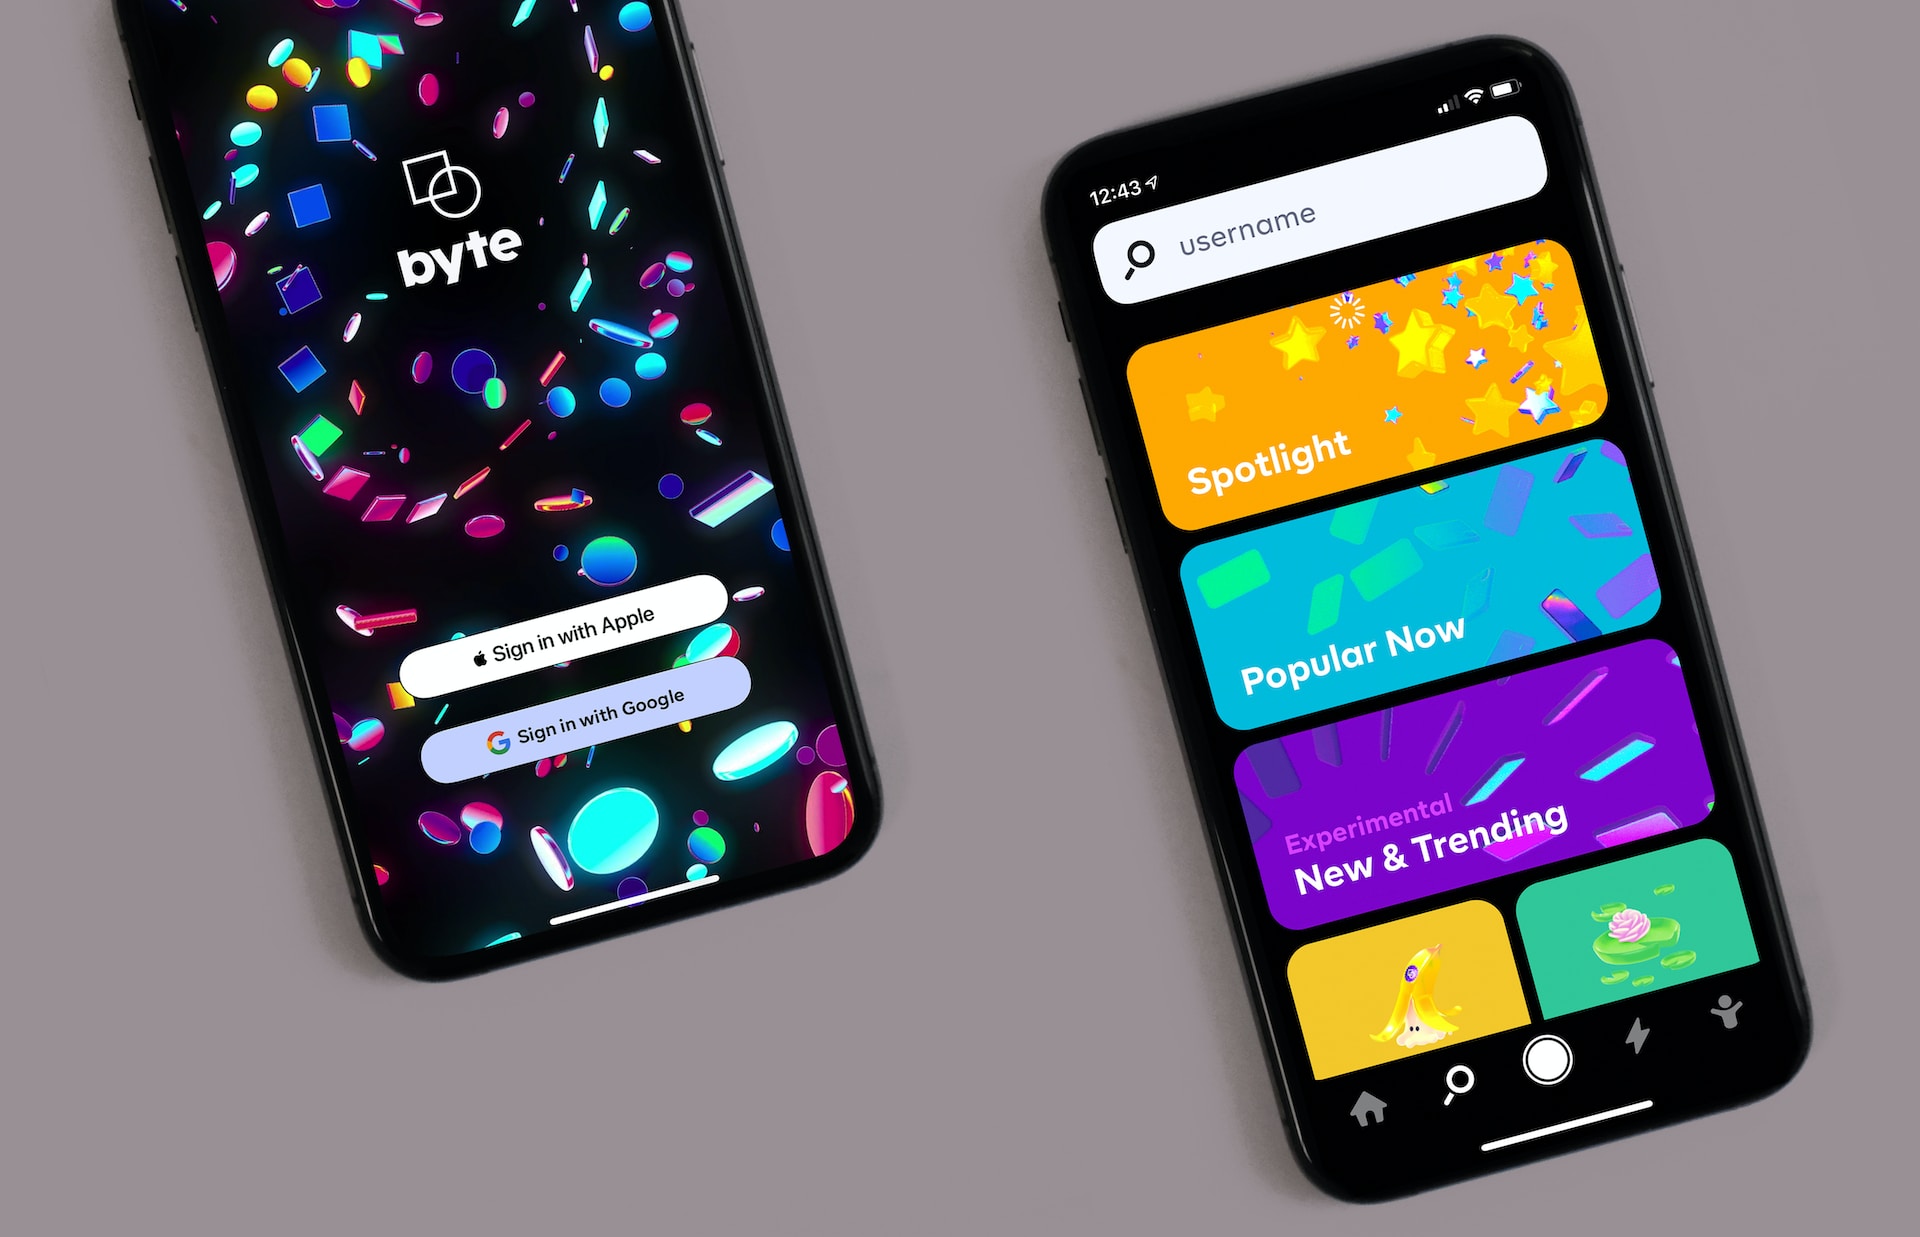 'Photo of two black cell phones. The one on the upper left is showing an app login screen with a black background. It has the option to sign in with Apple or with Google. The app is named byte. there are multiple colourful small shapes swirling around the background. The second phone in the lower left shows the same app after login. It's also a black background. The top has a search bar that says "user name" Then there is an orange-yellow area that says "Spotlight" with stars around it. Underneath is a light blue area that says "Popular Now", then another area that's purple that says "Experimental, New & Trending" finally there's two side by side squares with no text. The on on the left is yellow ith an open banana. The one on the left is very light green with a lilly pad with a pink flower.'